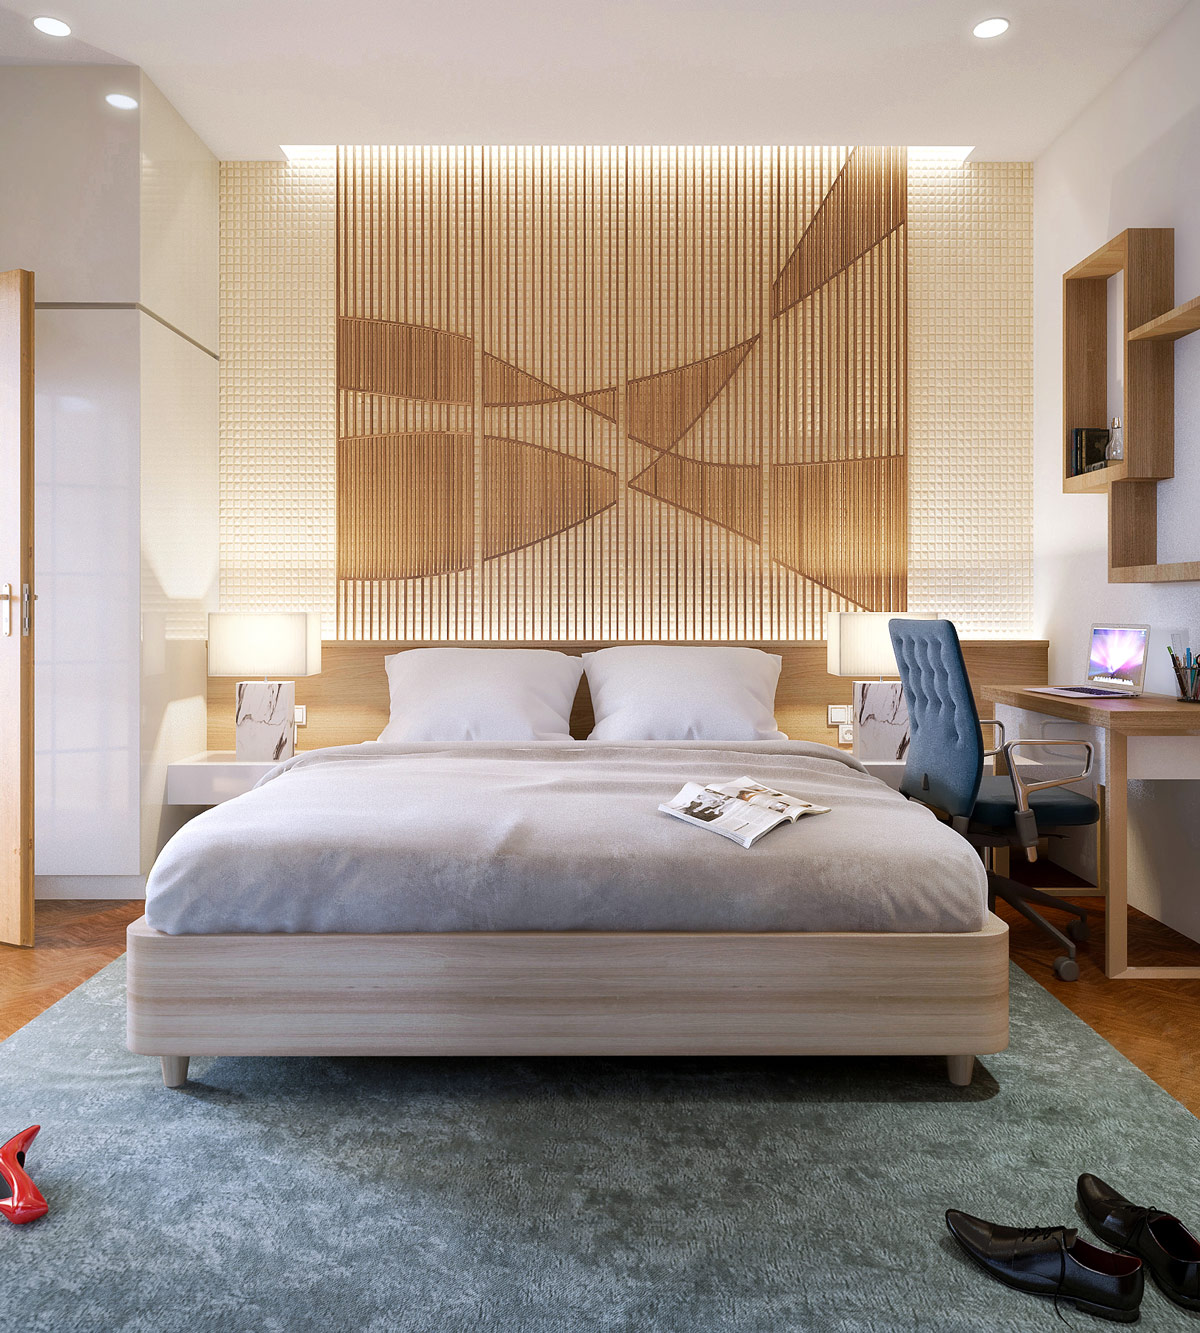 bedroom-accent-wall-slats-intertwined-pattern